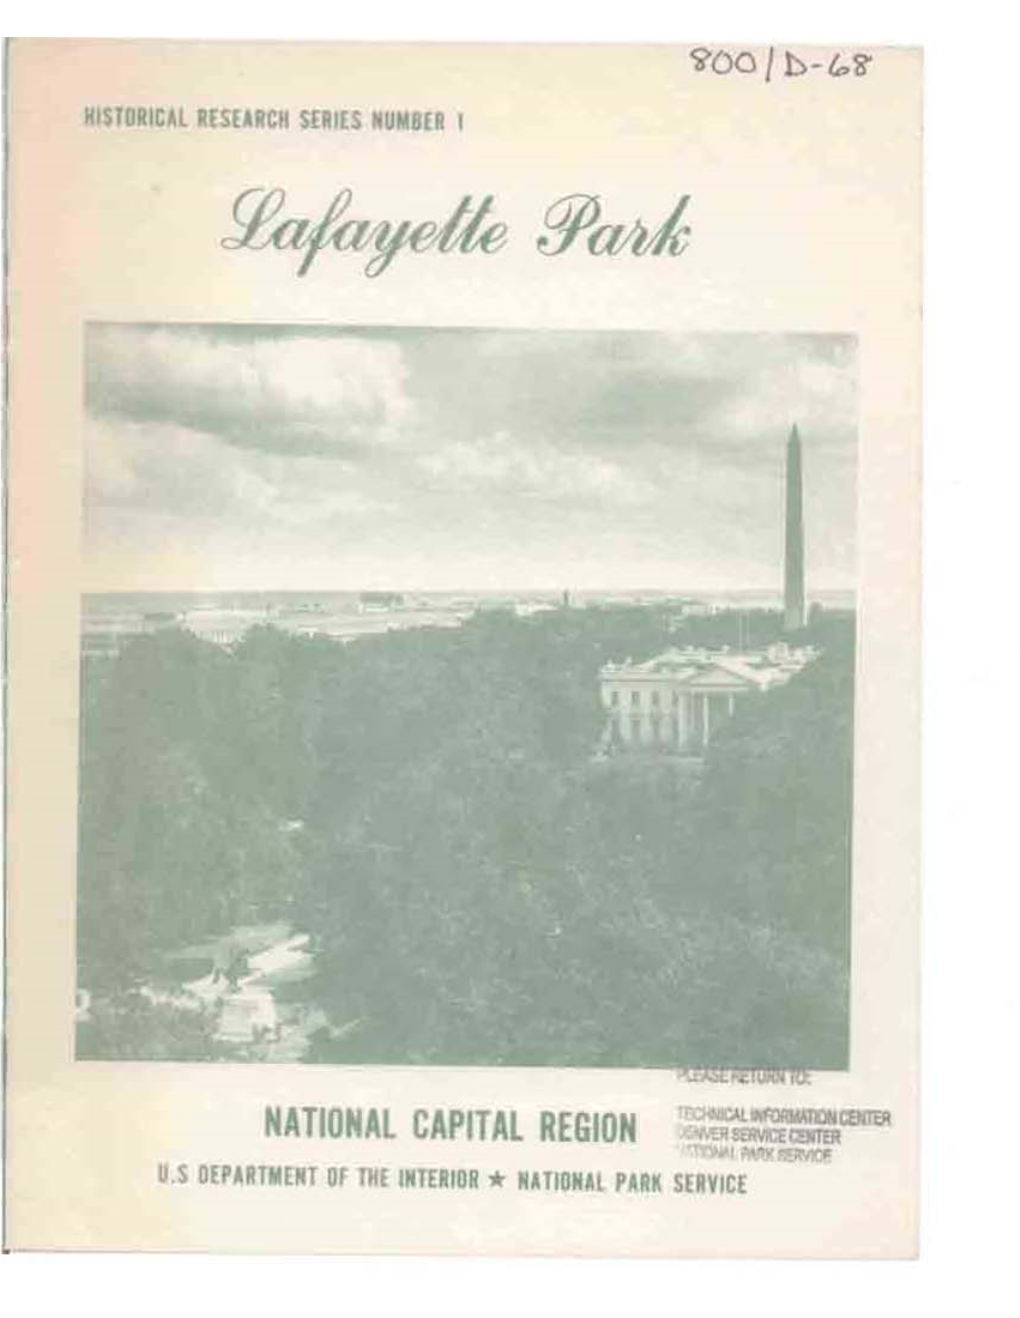 Lafayette Park Is a Unit, Is Dedicated to Conserving the Scenic Scientific and Historic Heritage Oj the United States for the Benefit and Inspira Tion of Its People